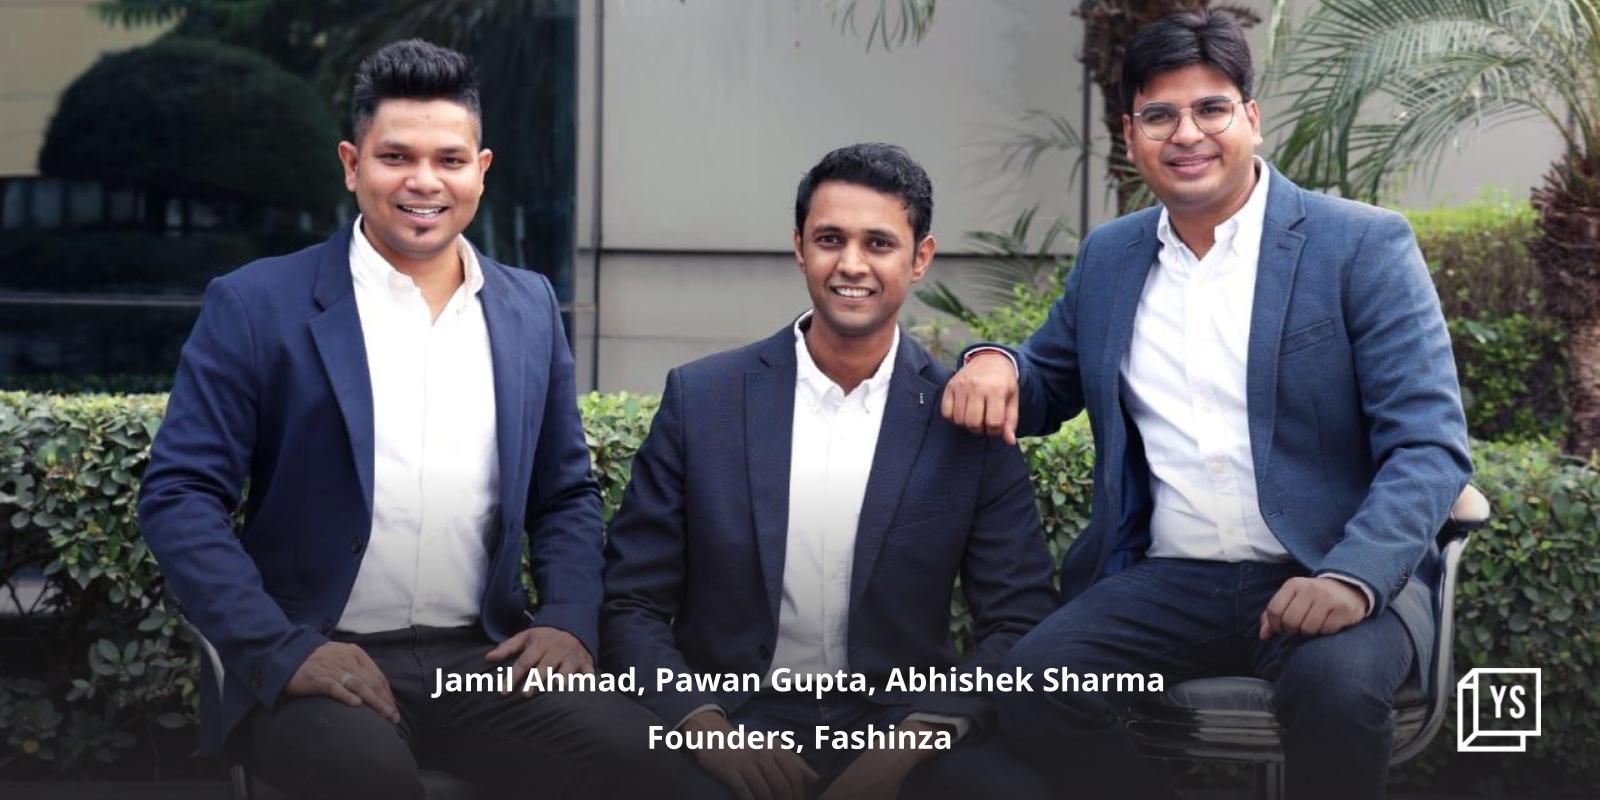 Fashion supply chain startup Fashinza gets $30M from Mars Growth Capital, Liquidity Group